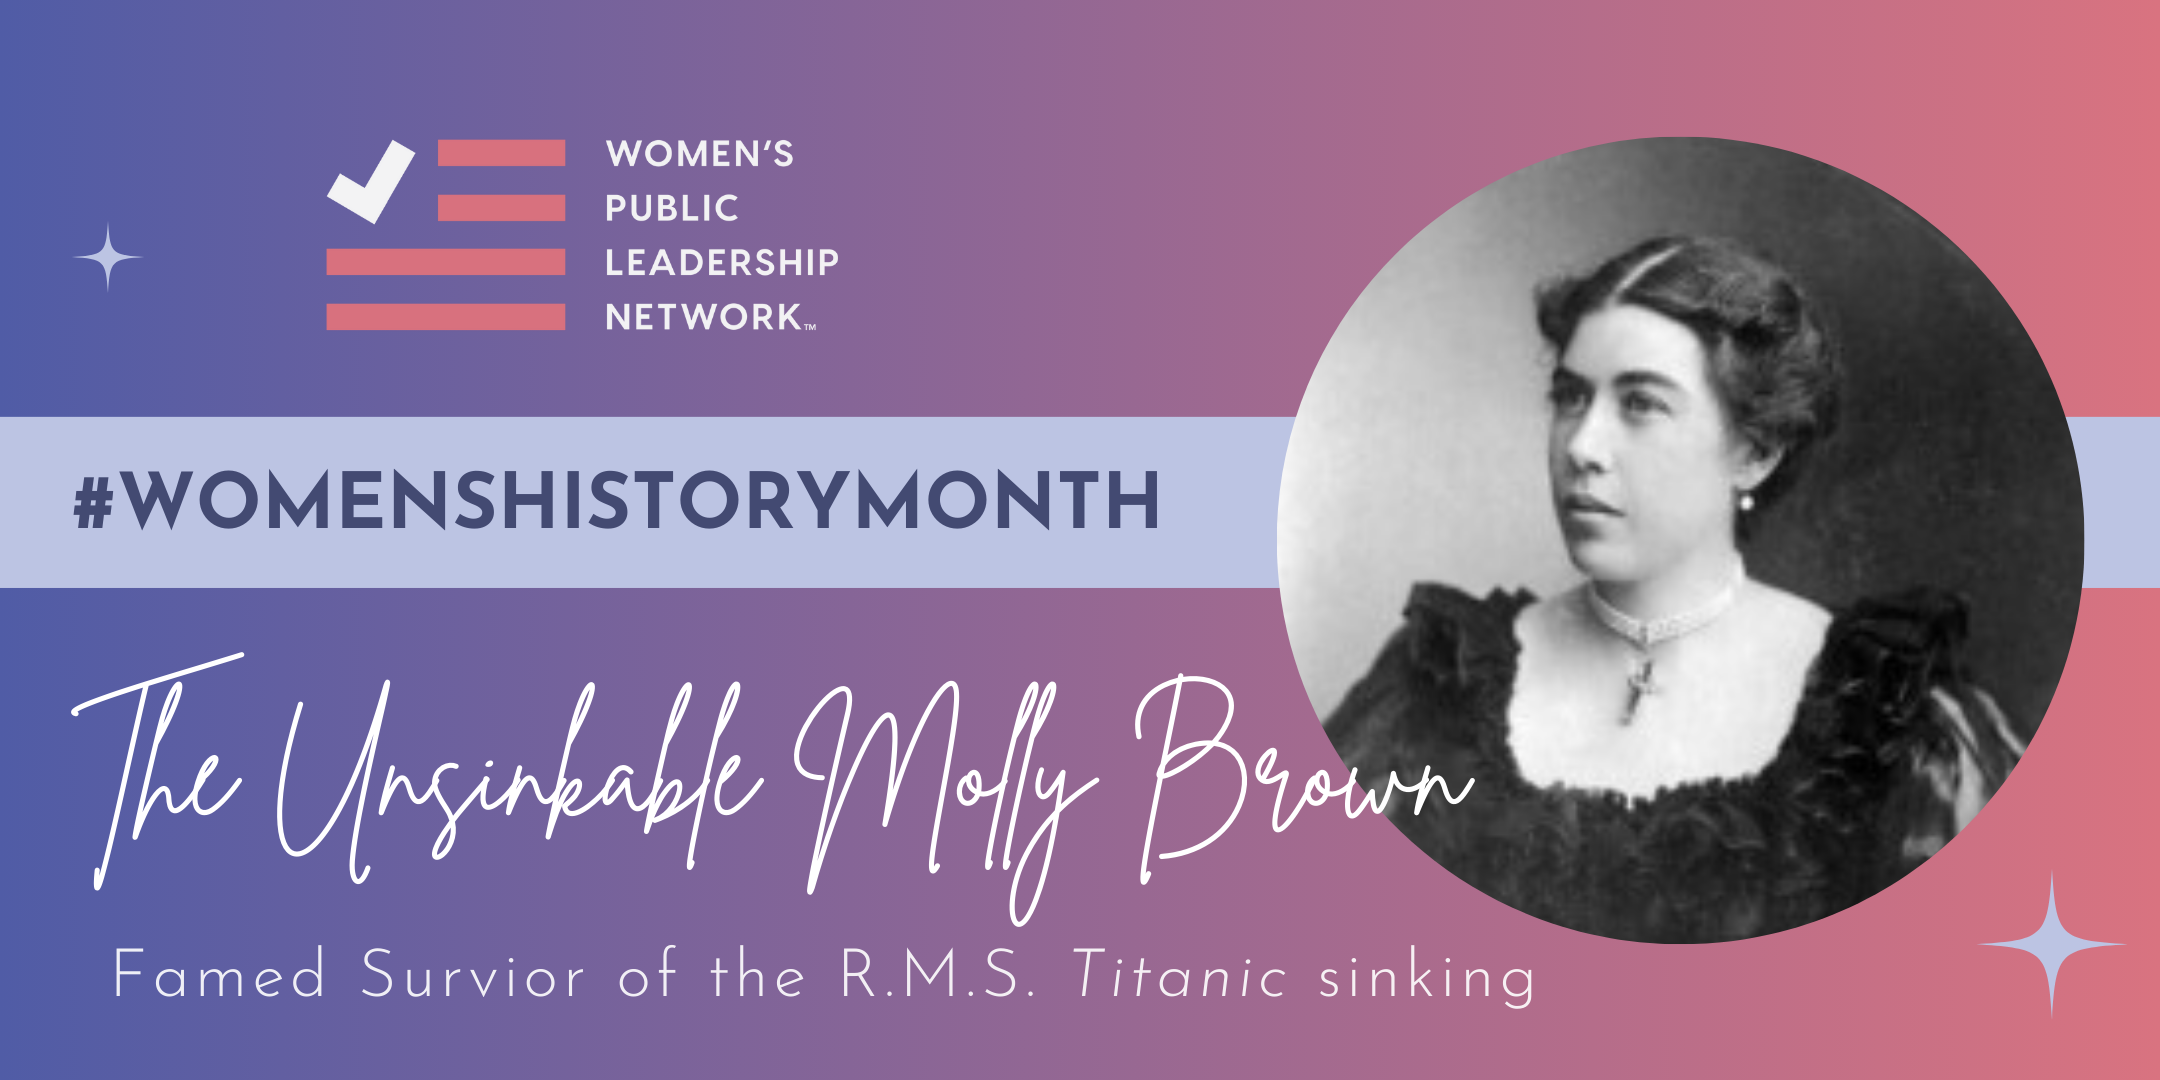 #WomensHistoryMonth: The Unsinkable Molly Brown